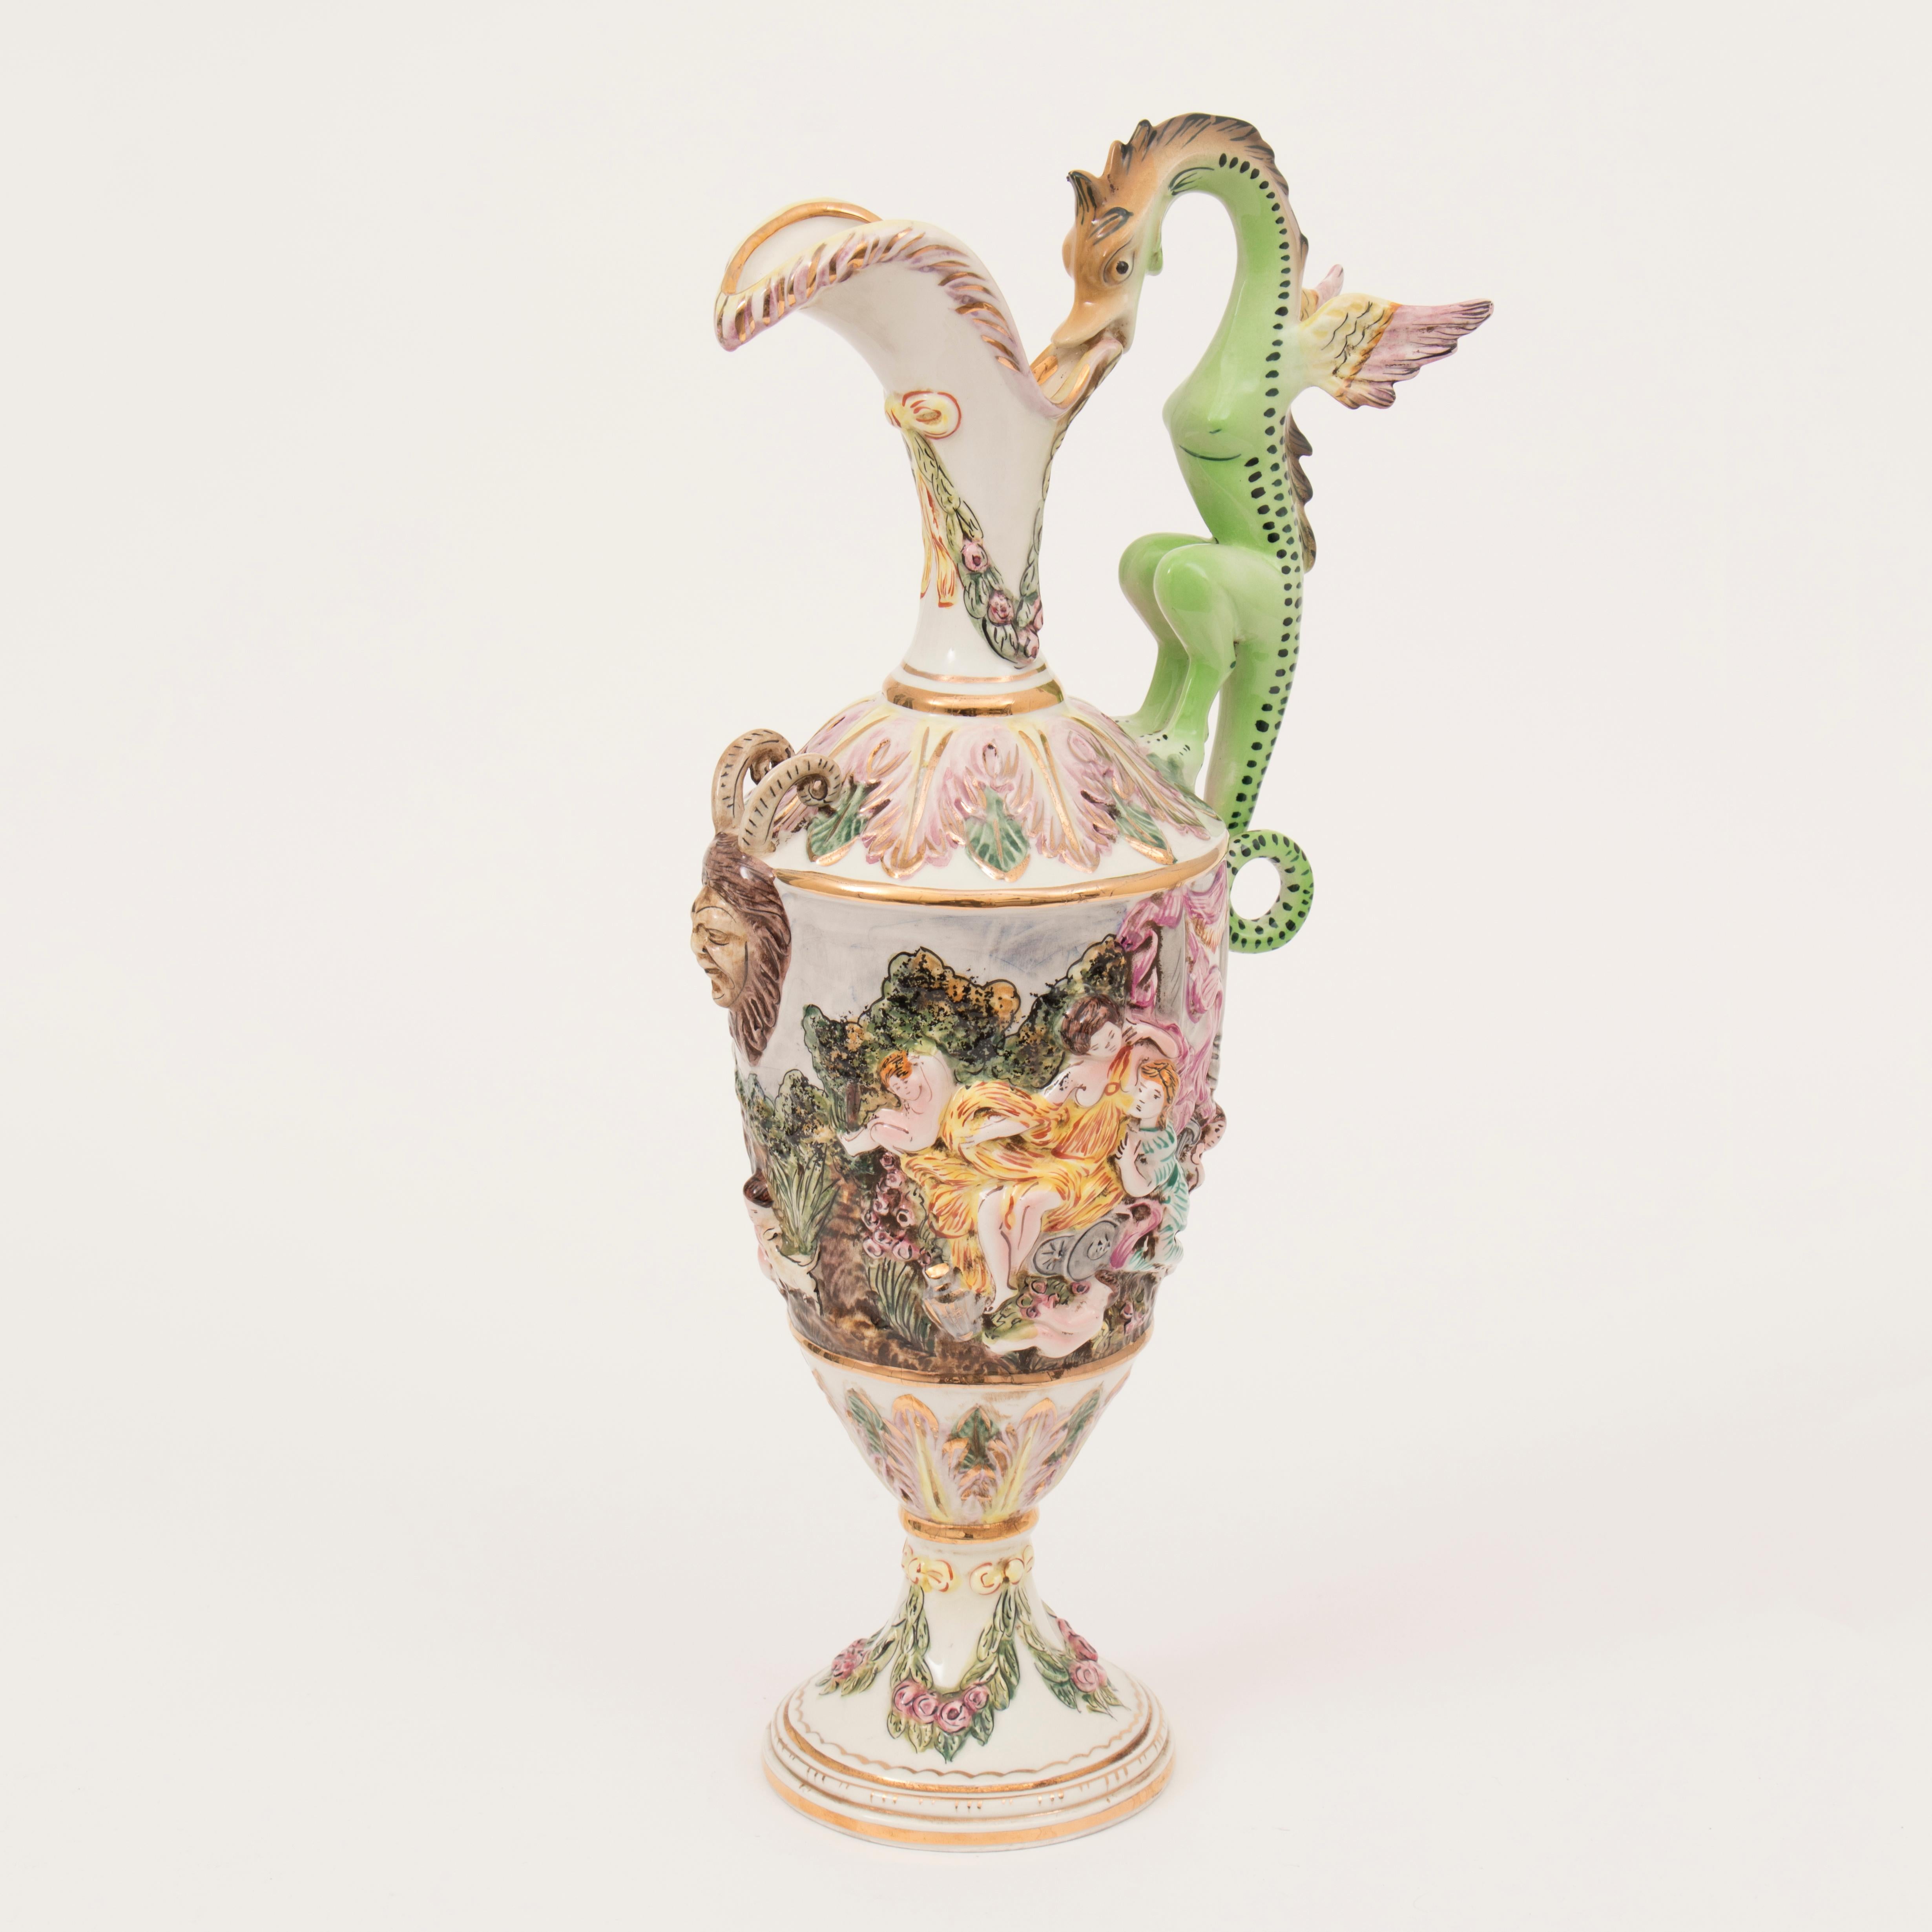 A 1950s vintage large Italian Capodimonte porcelain pitcher with an ornate winged dragon handle. The pitcher features a colourful mythological garden scene with cherubs, robed ladies, animals and children. A feature Greek Satyr head and horns are on